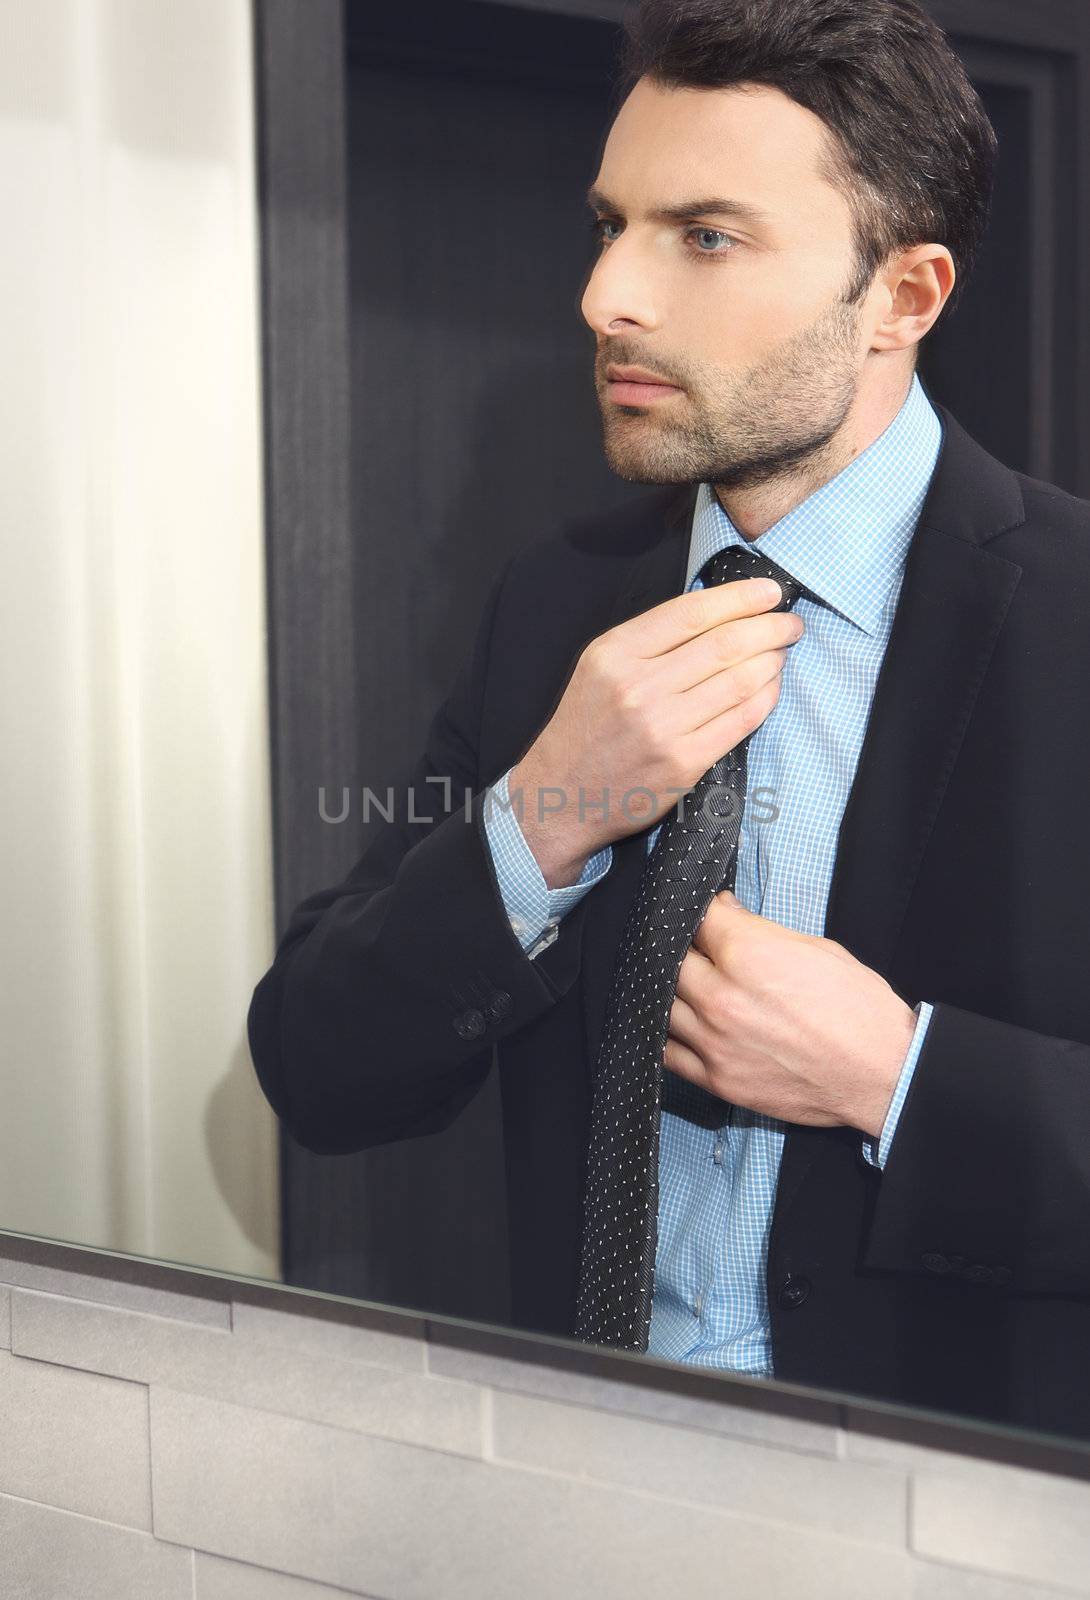 The young man looks at himself in the mirror and adjusts his tie